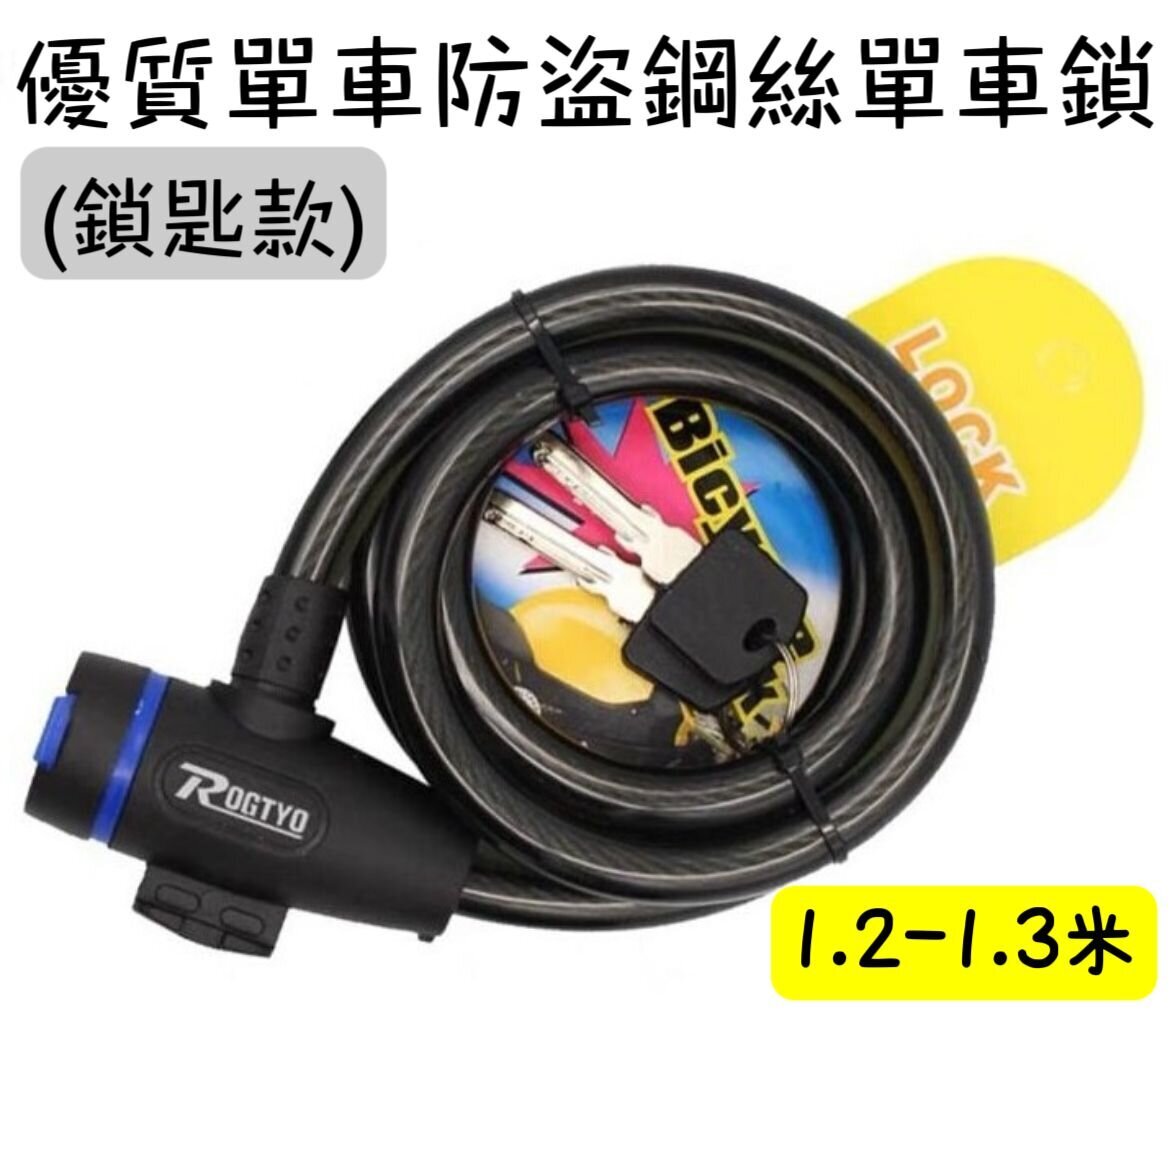 1.2-1.3m Hiigh quality bicycle anti-theft wire bicycle lock (Key type) (Random packaging and color)